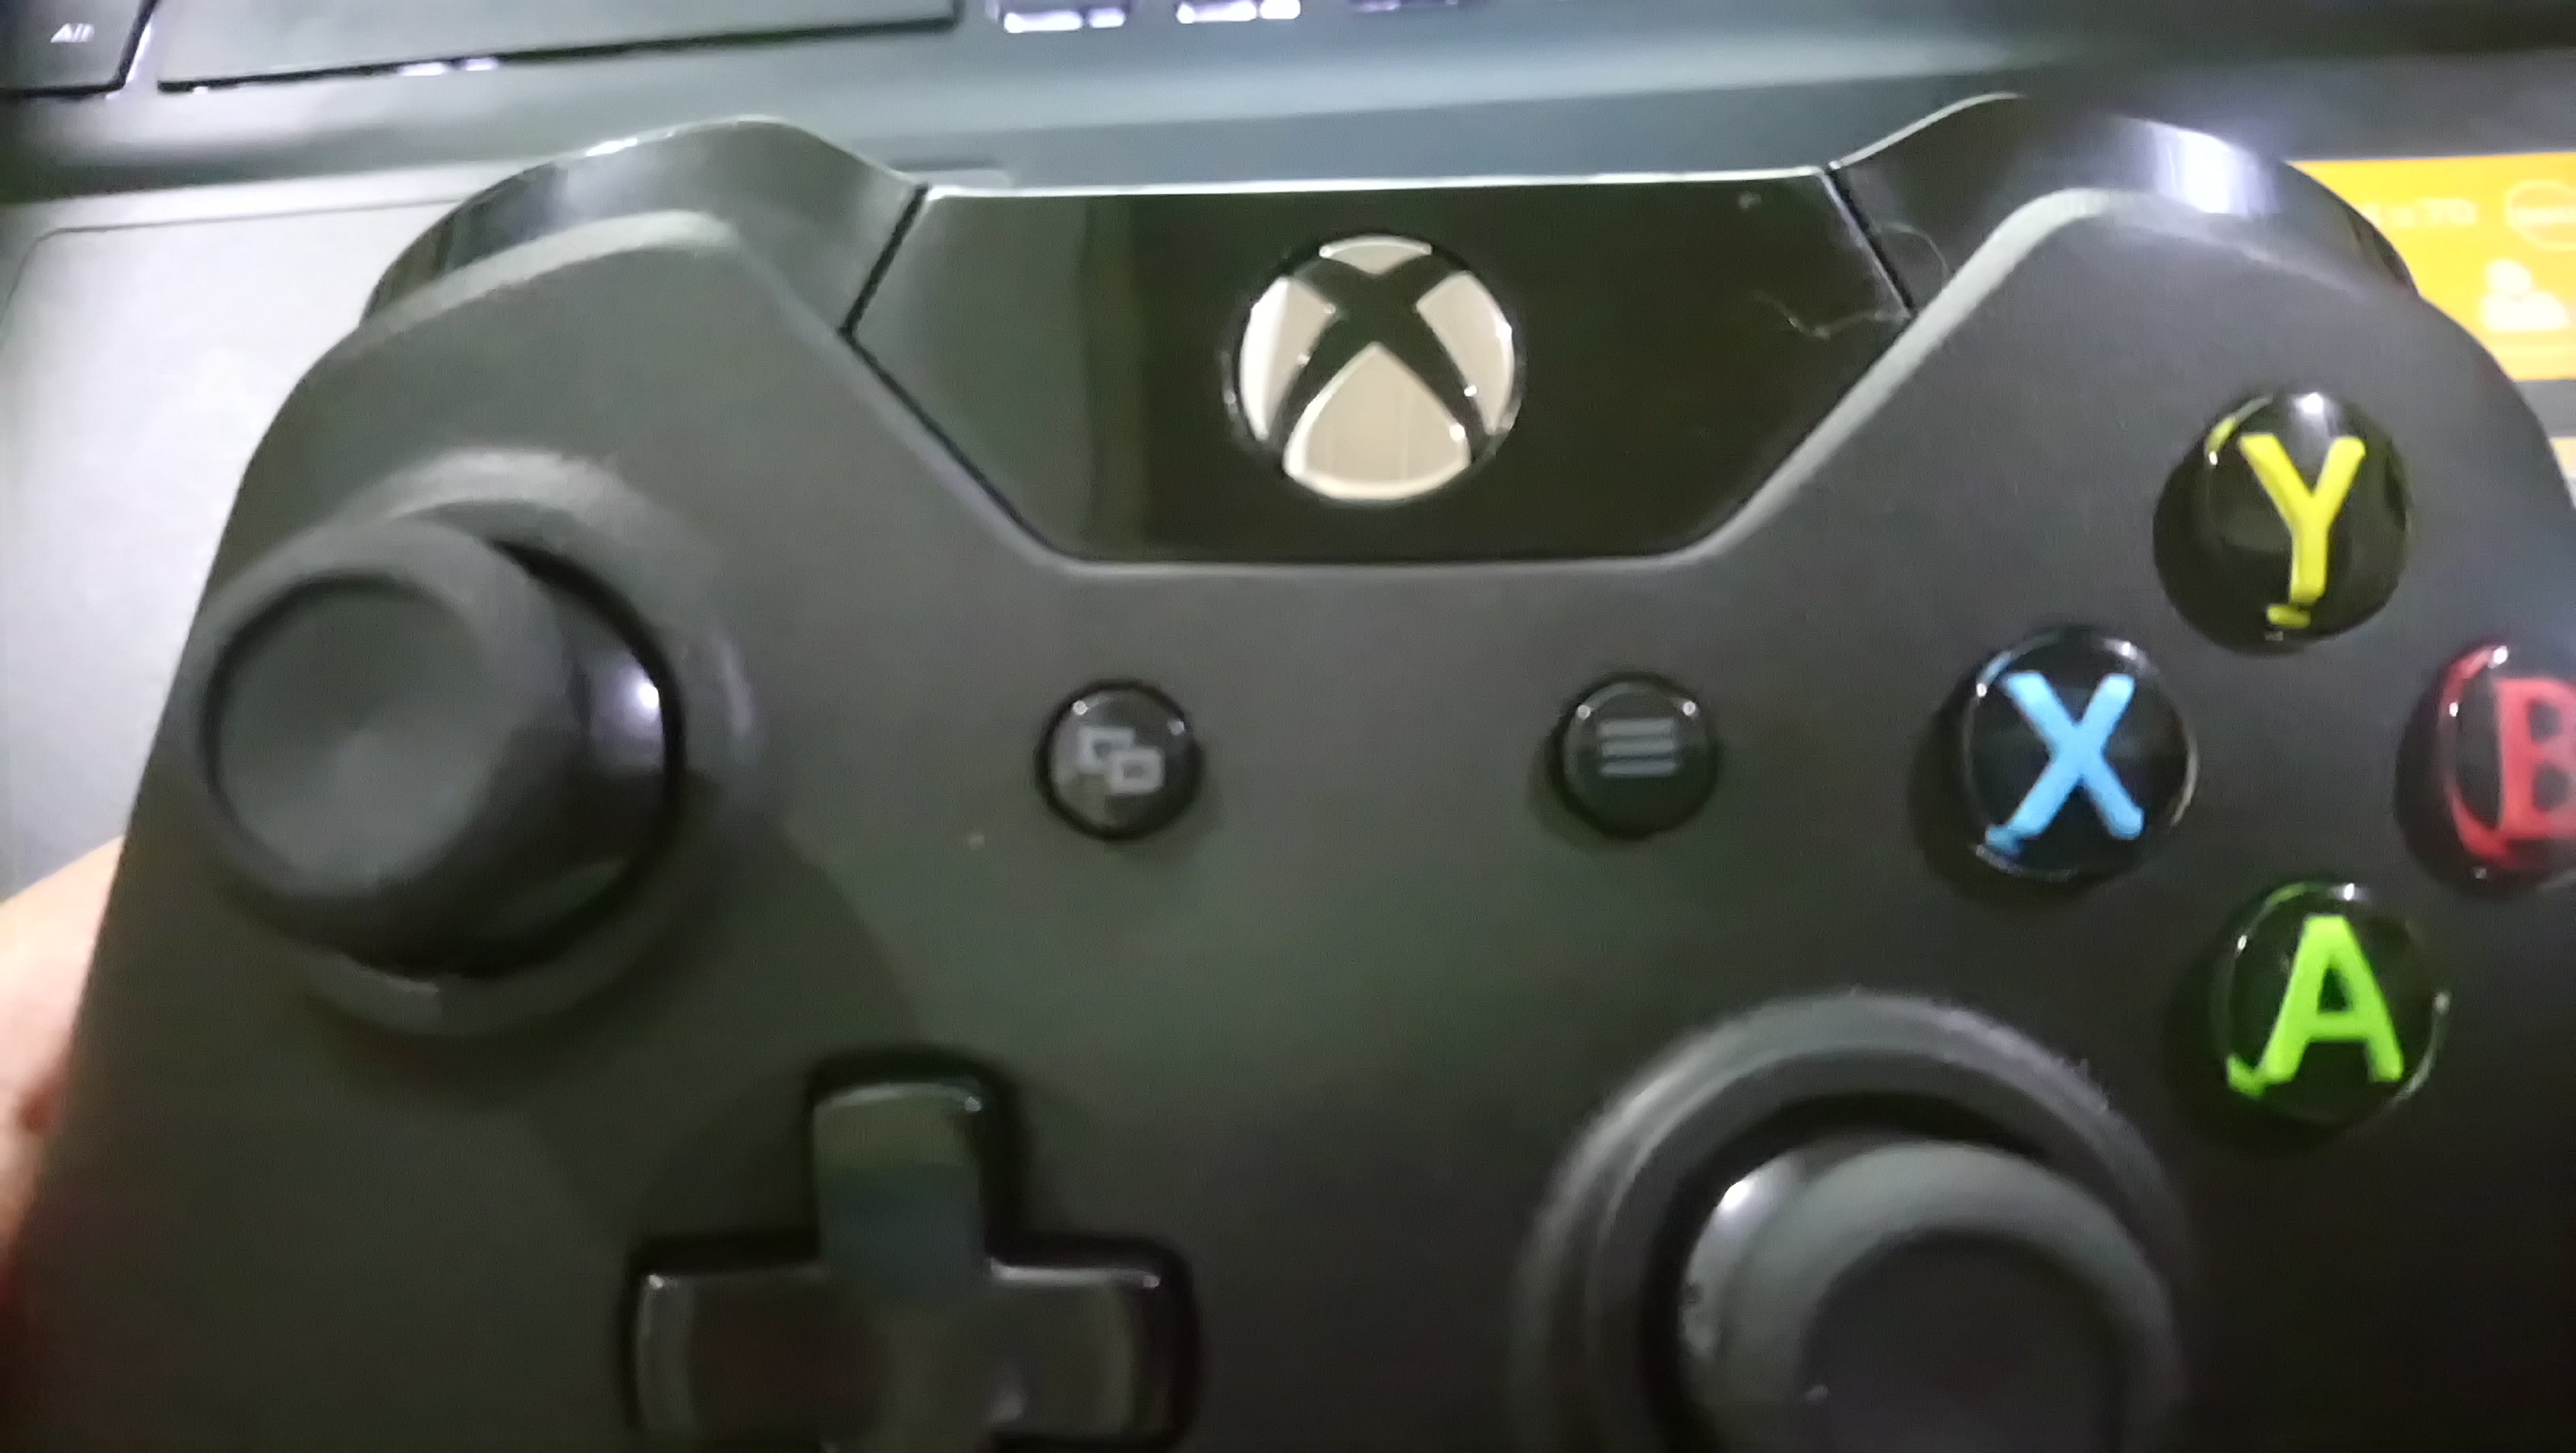 controller xbox one model 1708